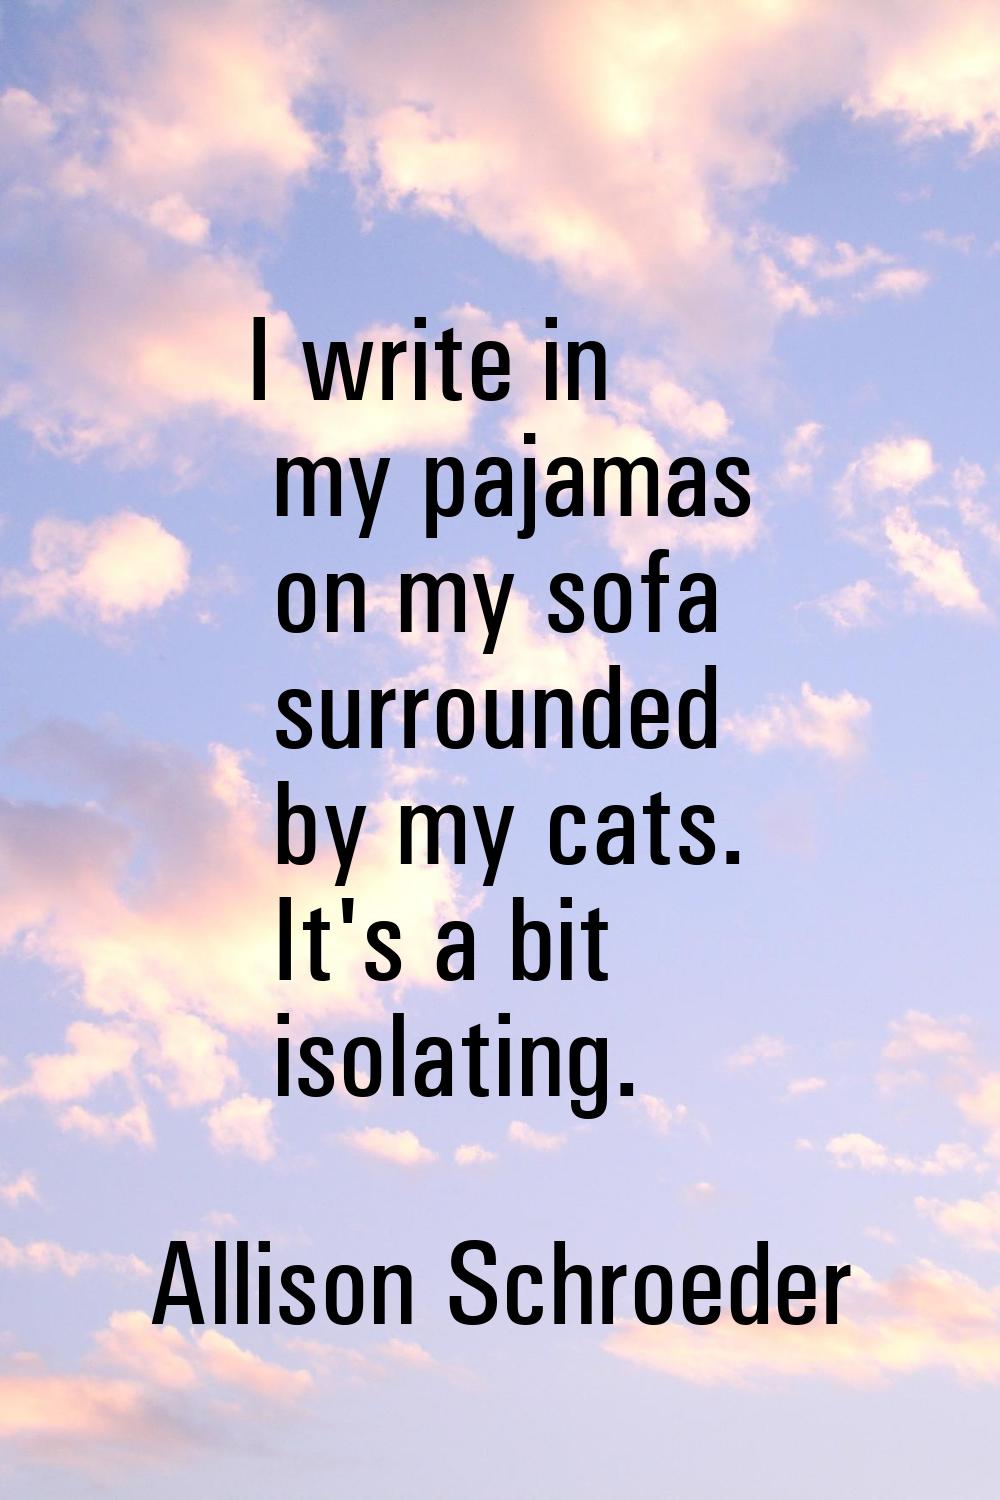 I write in my pajamas on my sofa surrounded by my cats. It's a bit isolating.